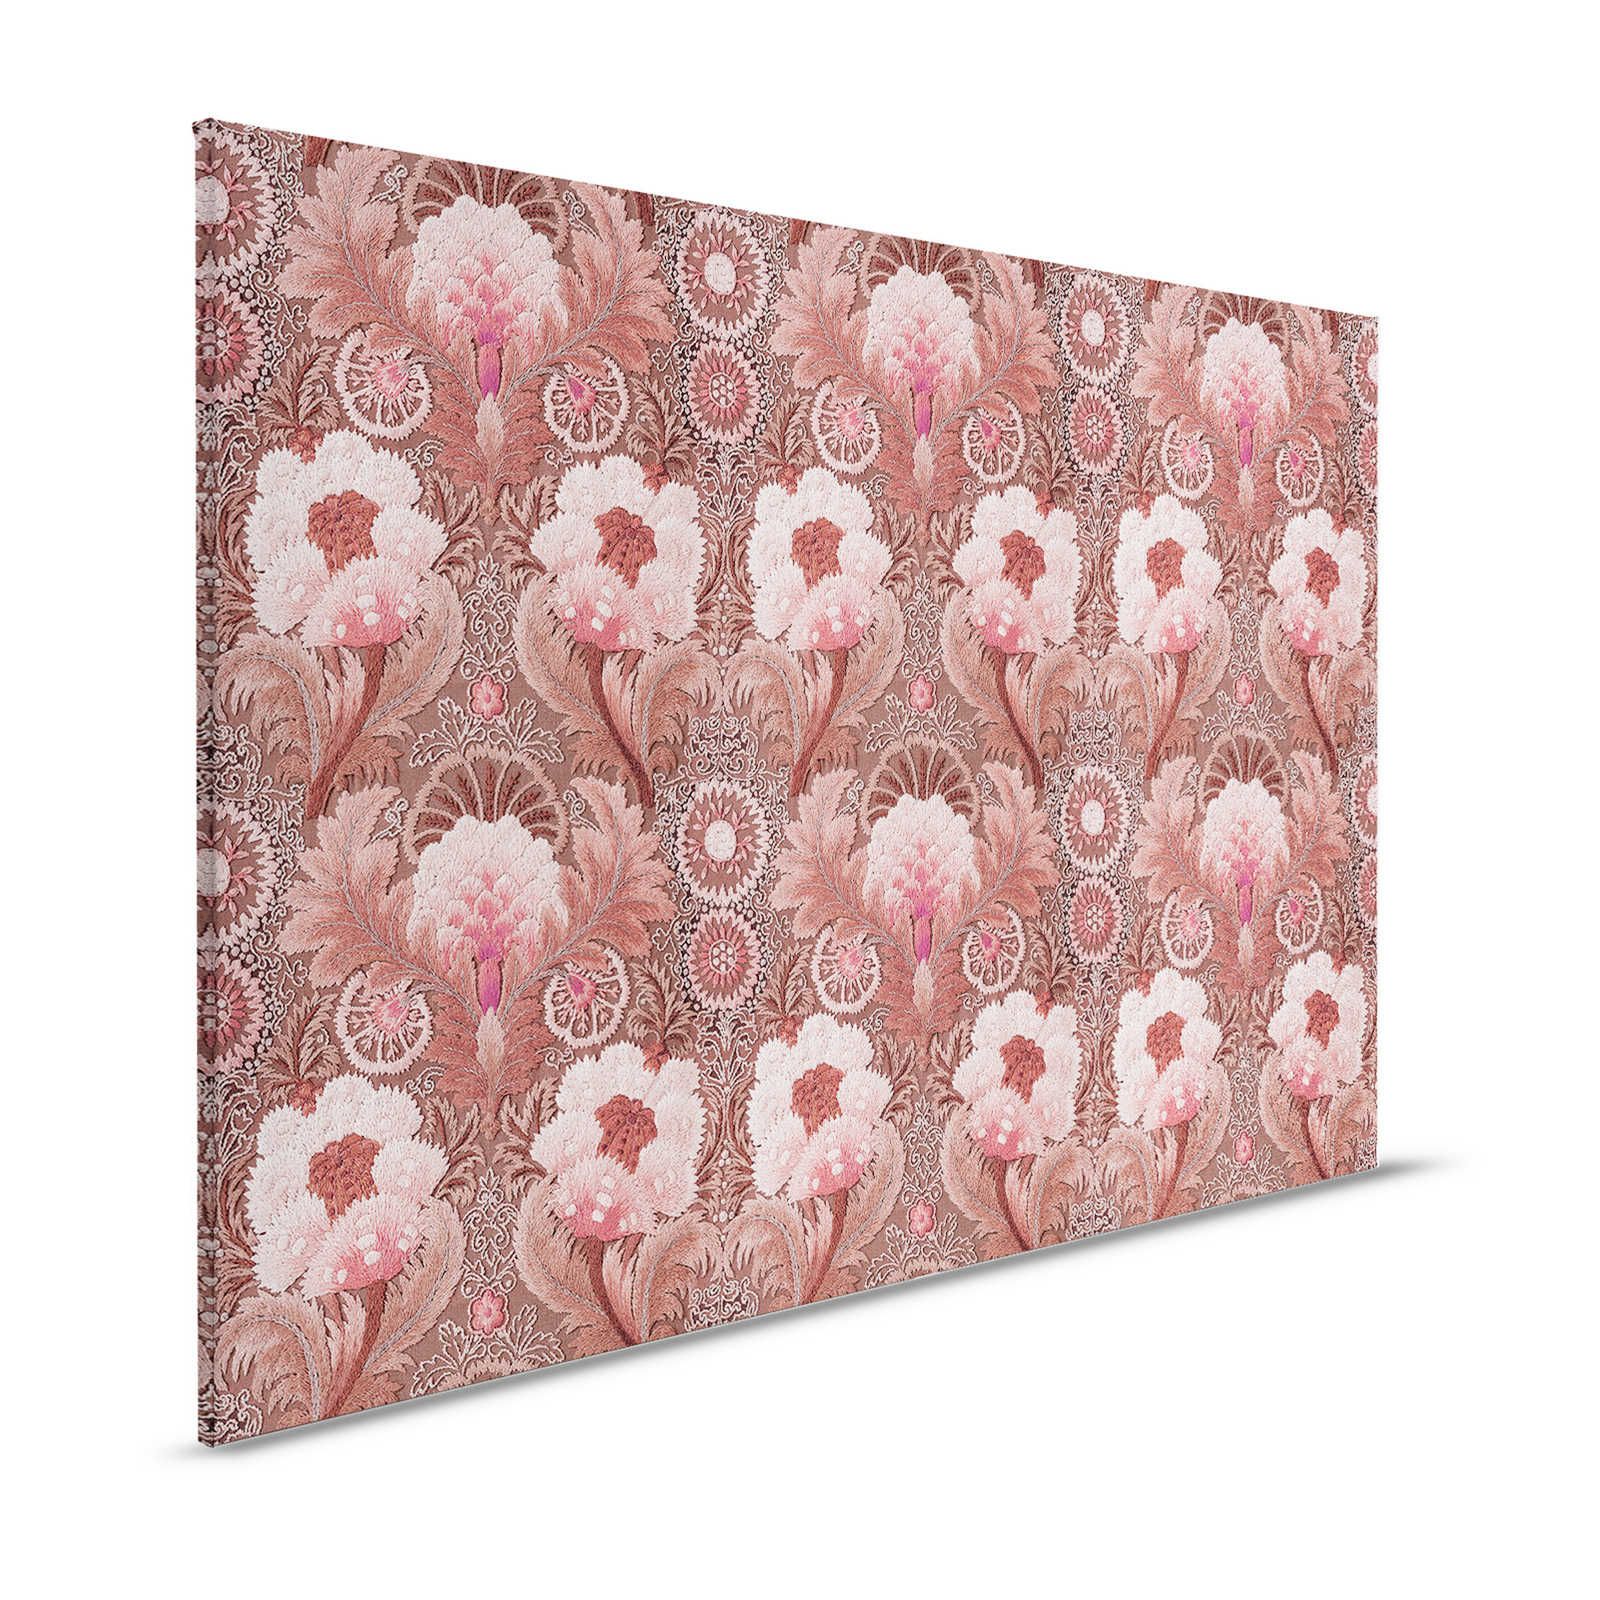 Chateau 2 - Pink Opulent Style Canvas Painting Ornaments - 1.20 m x 0.80 m
